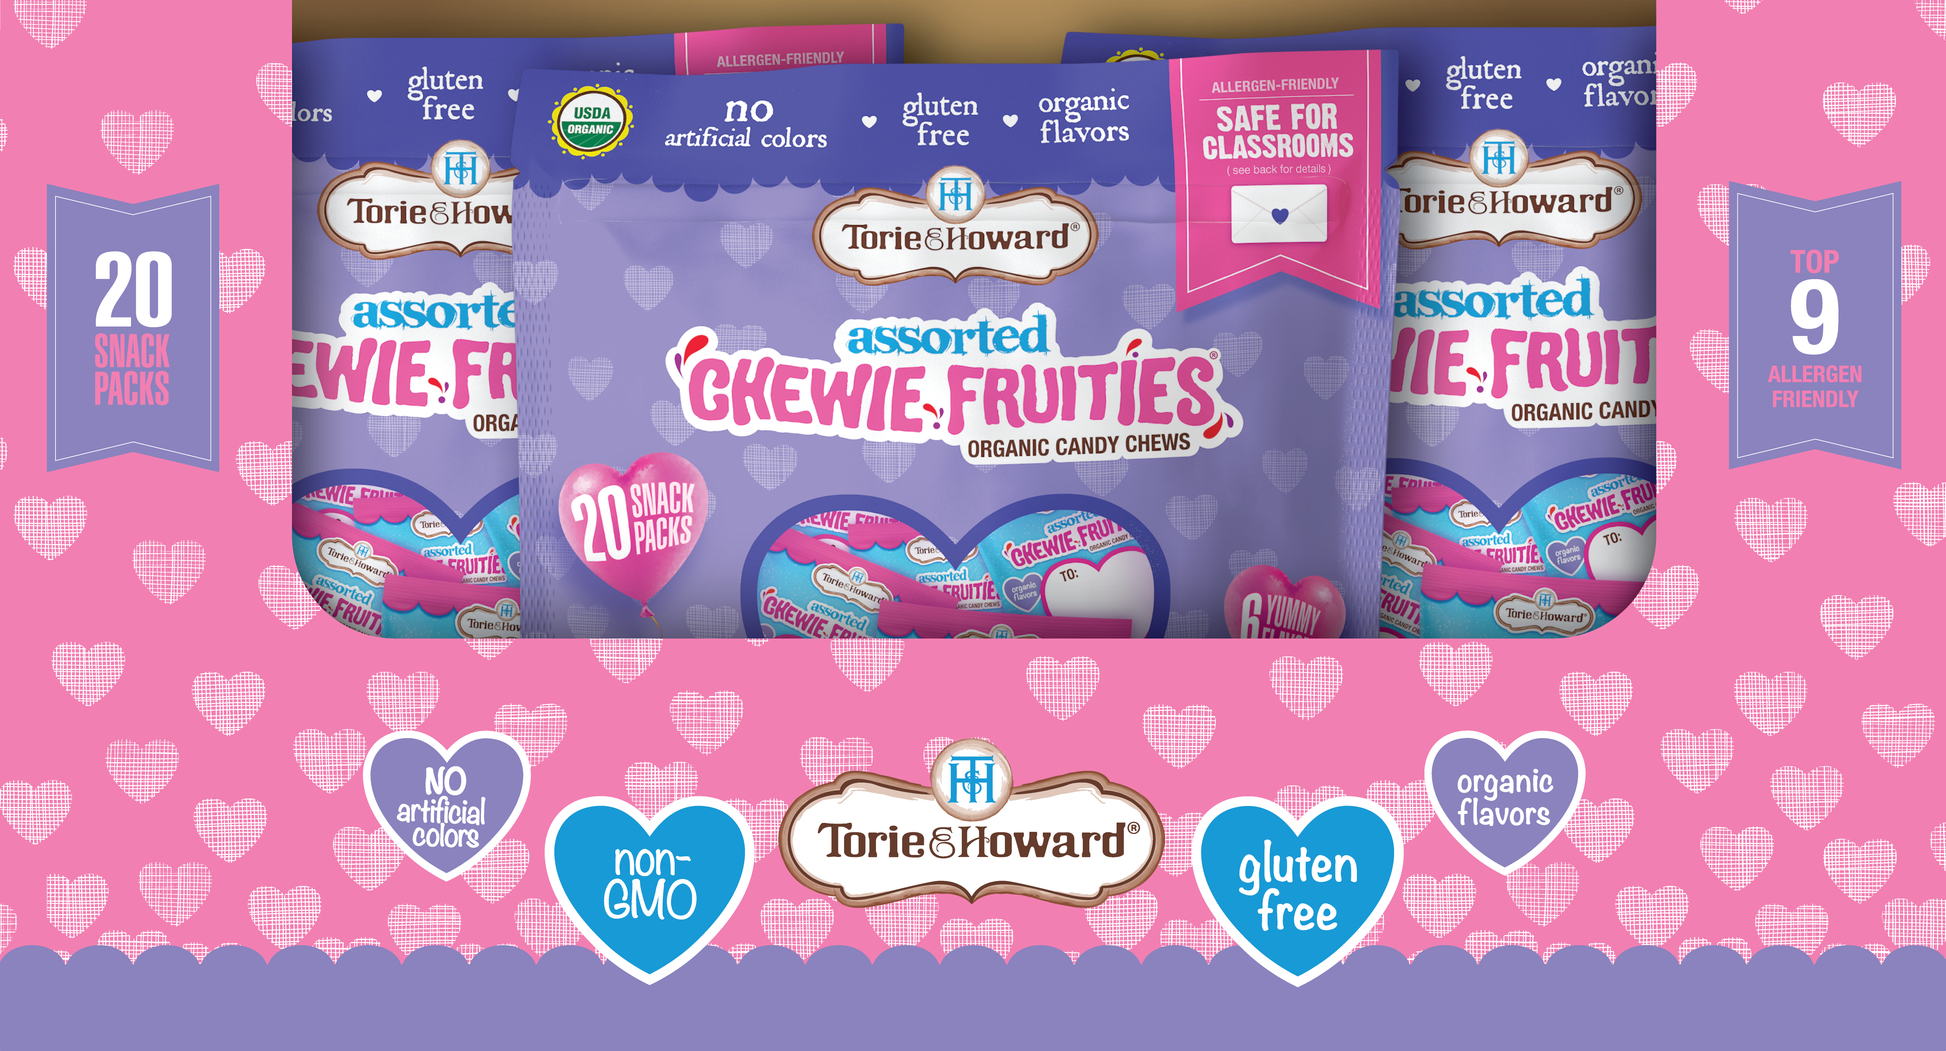 Sweethearts 10.5 oz bags, 12 count